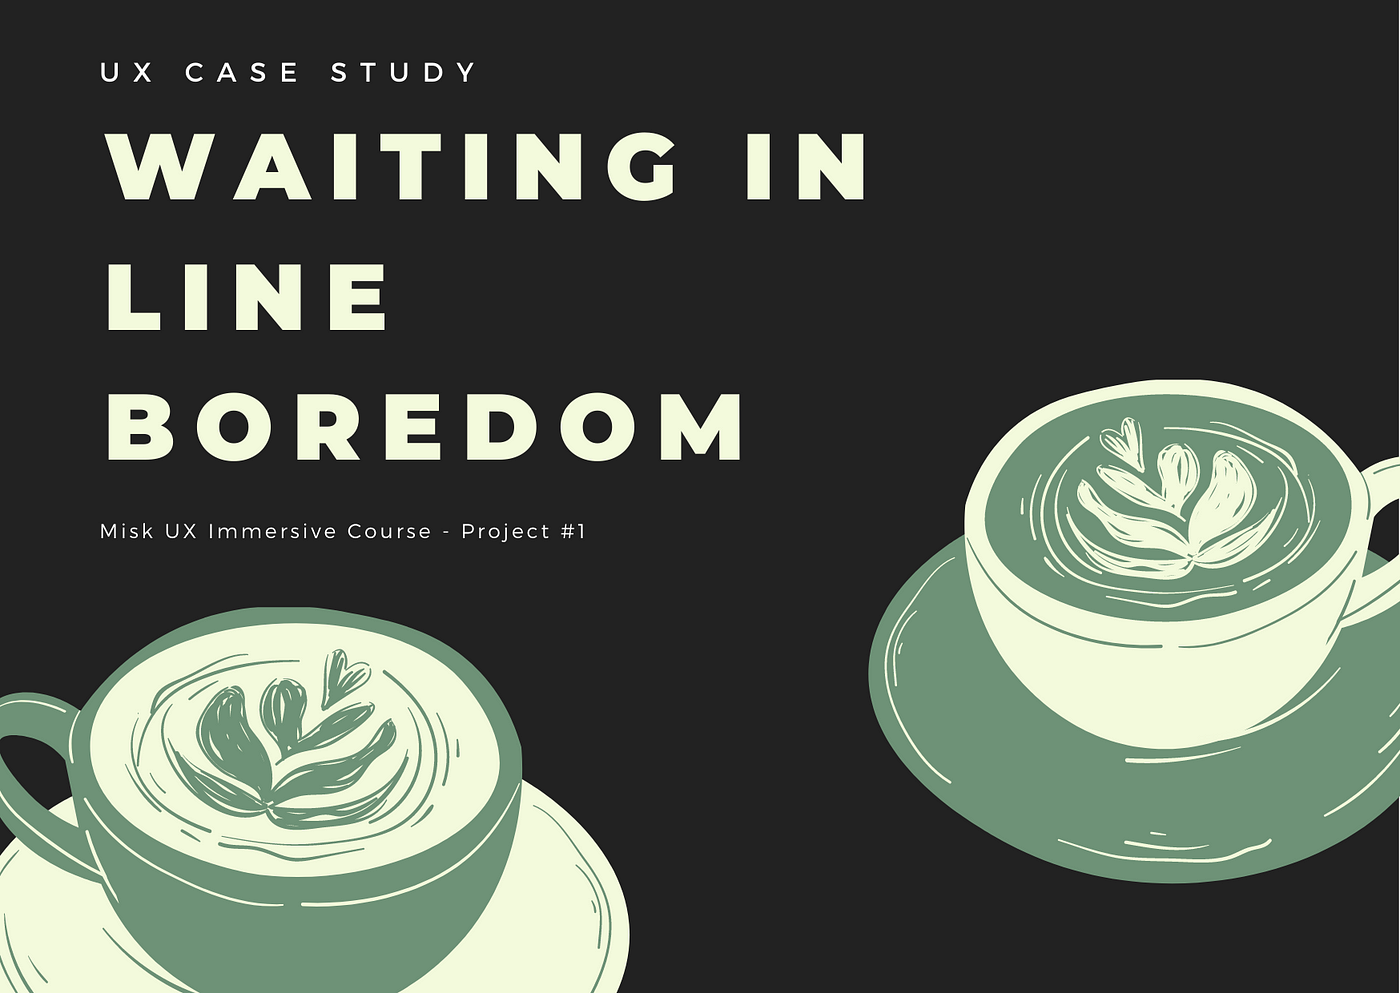 UX Case Study: Waiting in Line Boredom (Cafe) ☕️